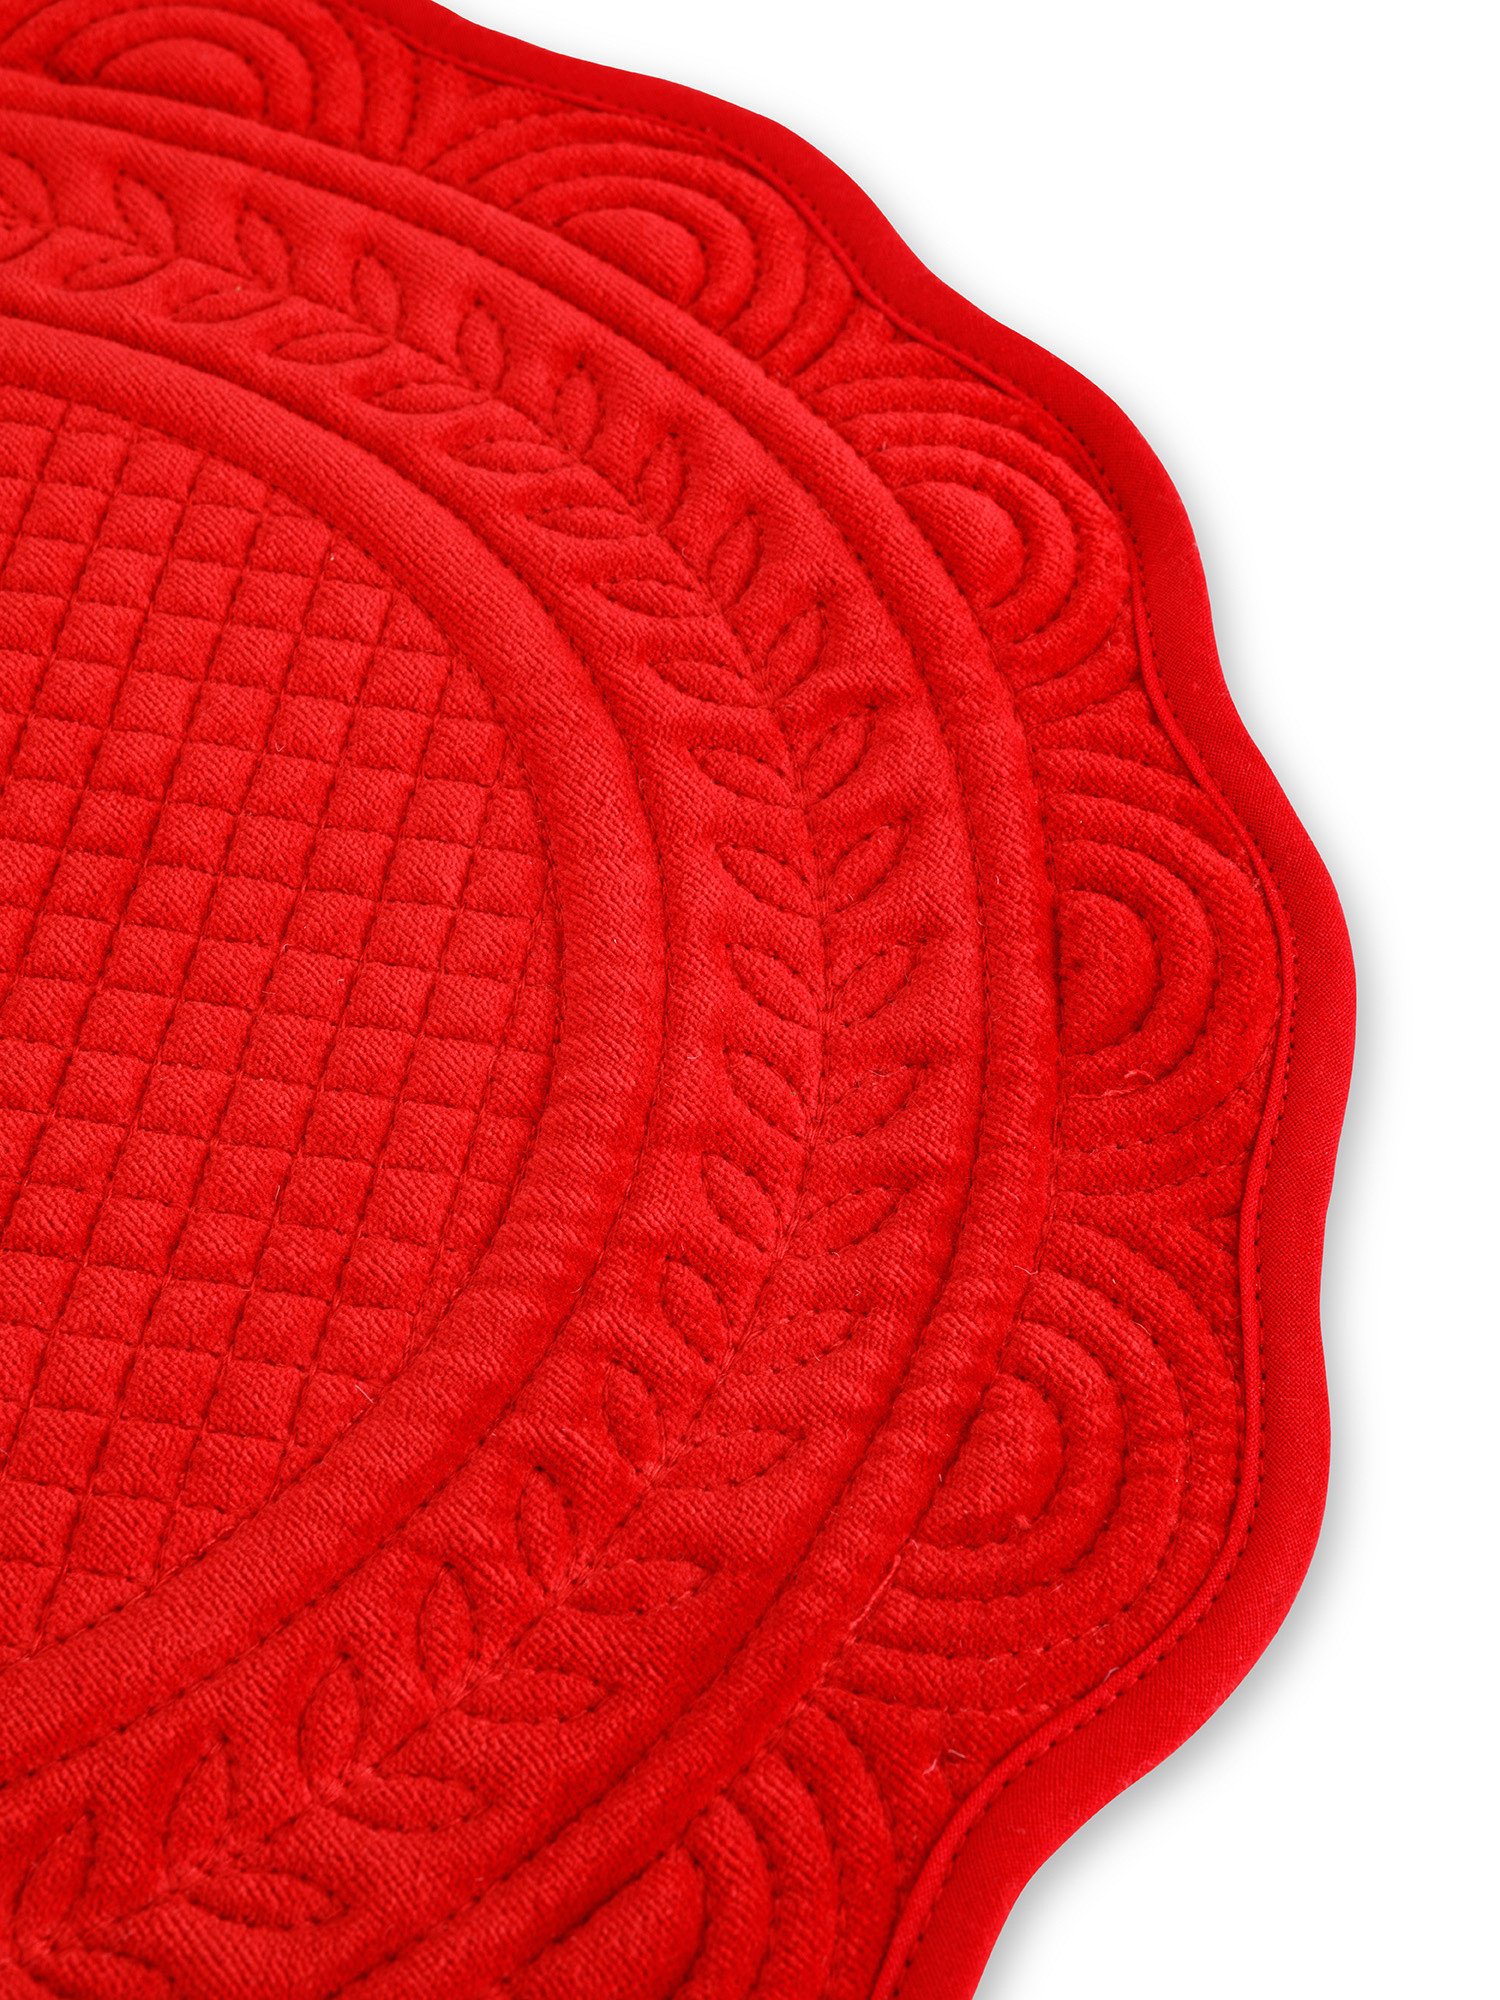 Solid color round quilted cotton velvet placemat, Red, large image number 1